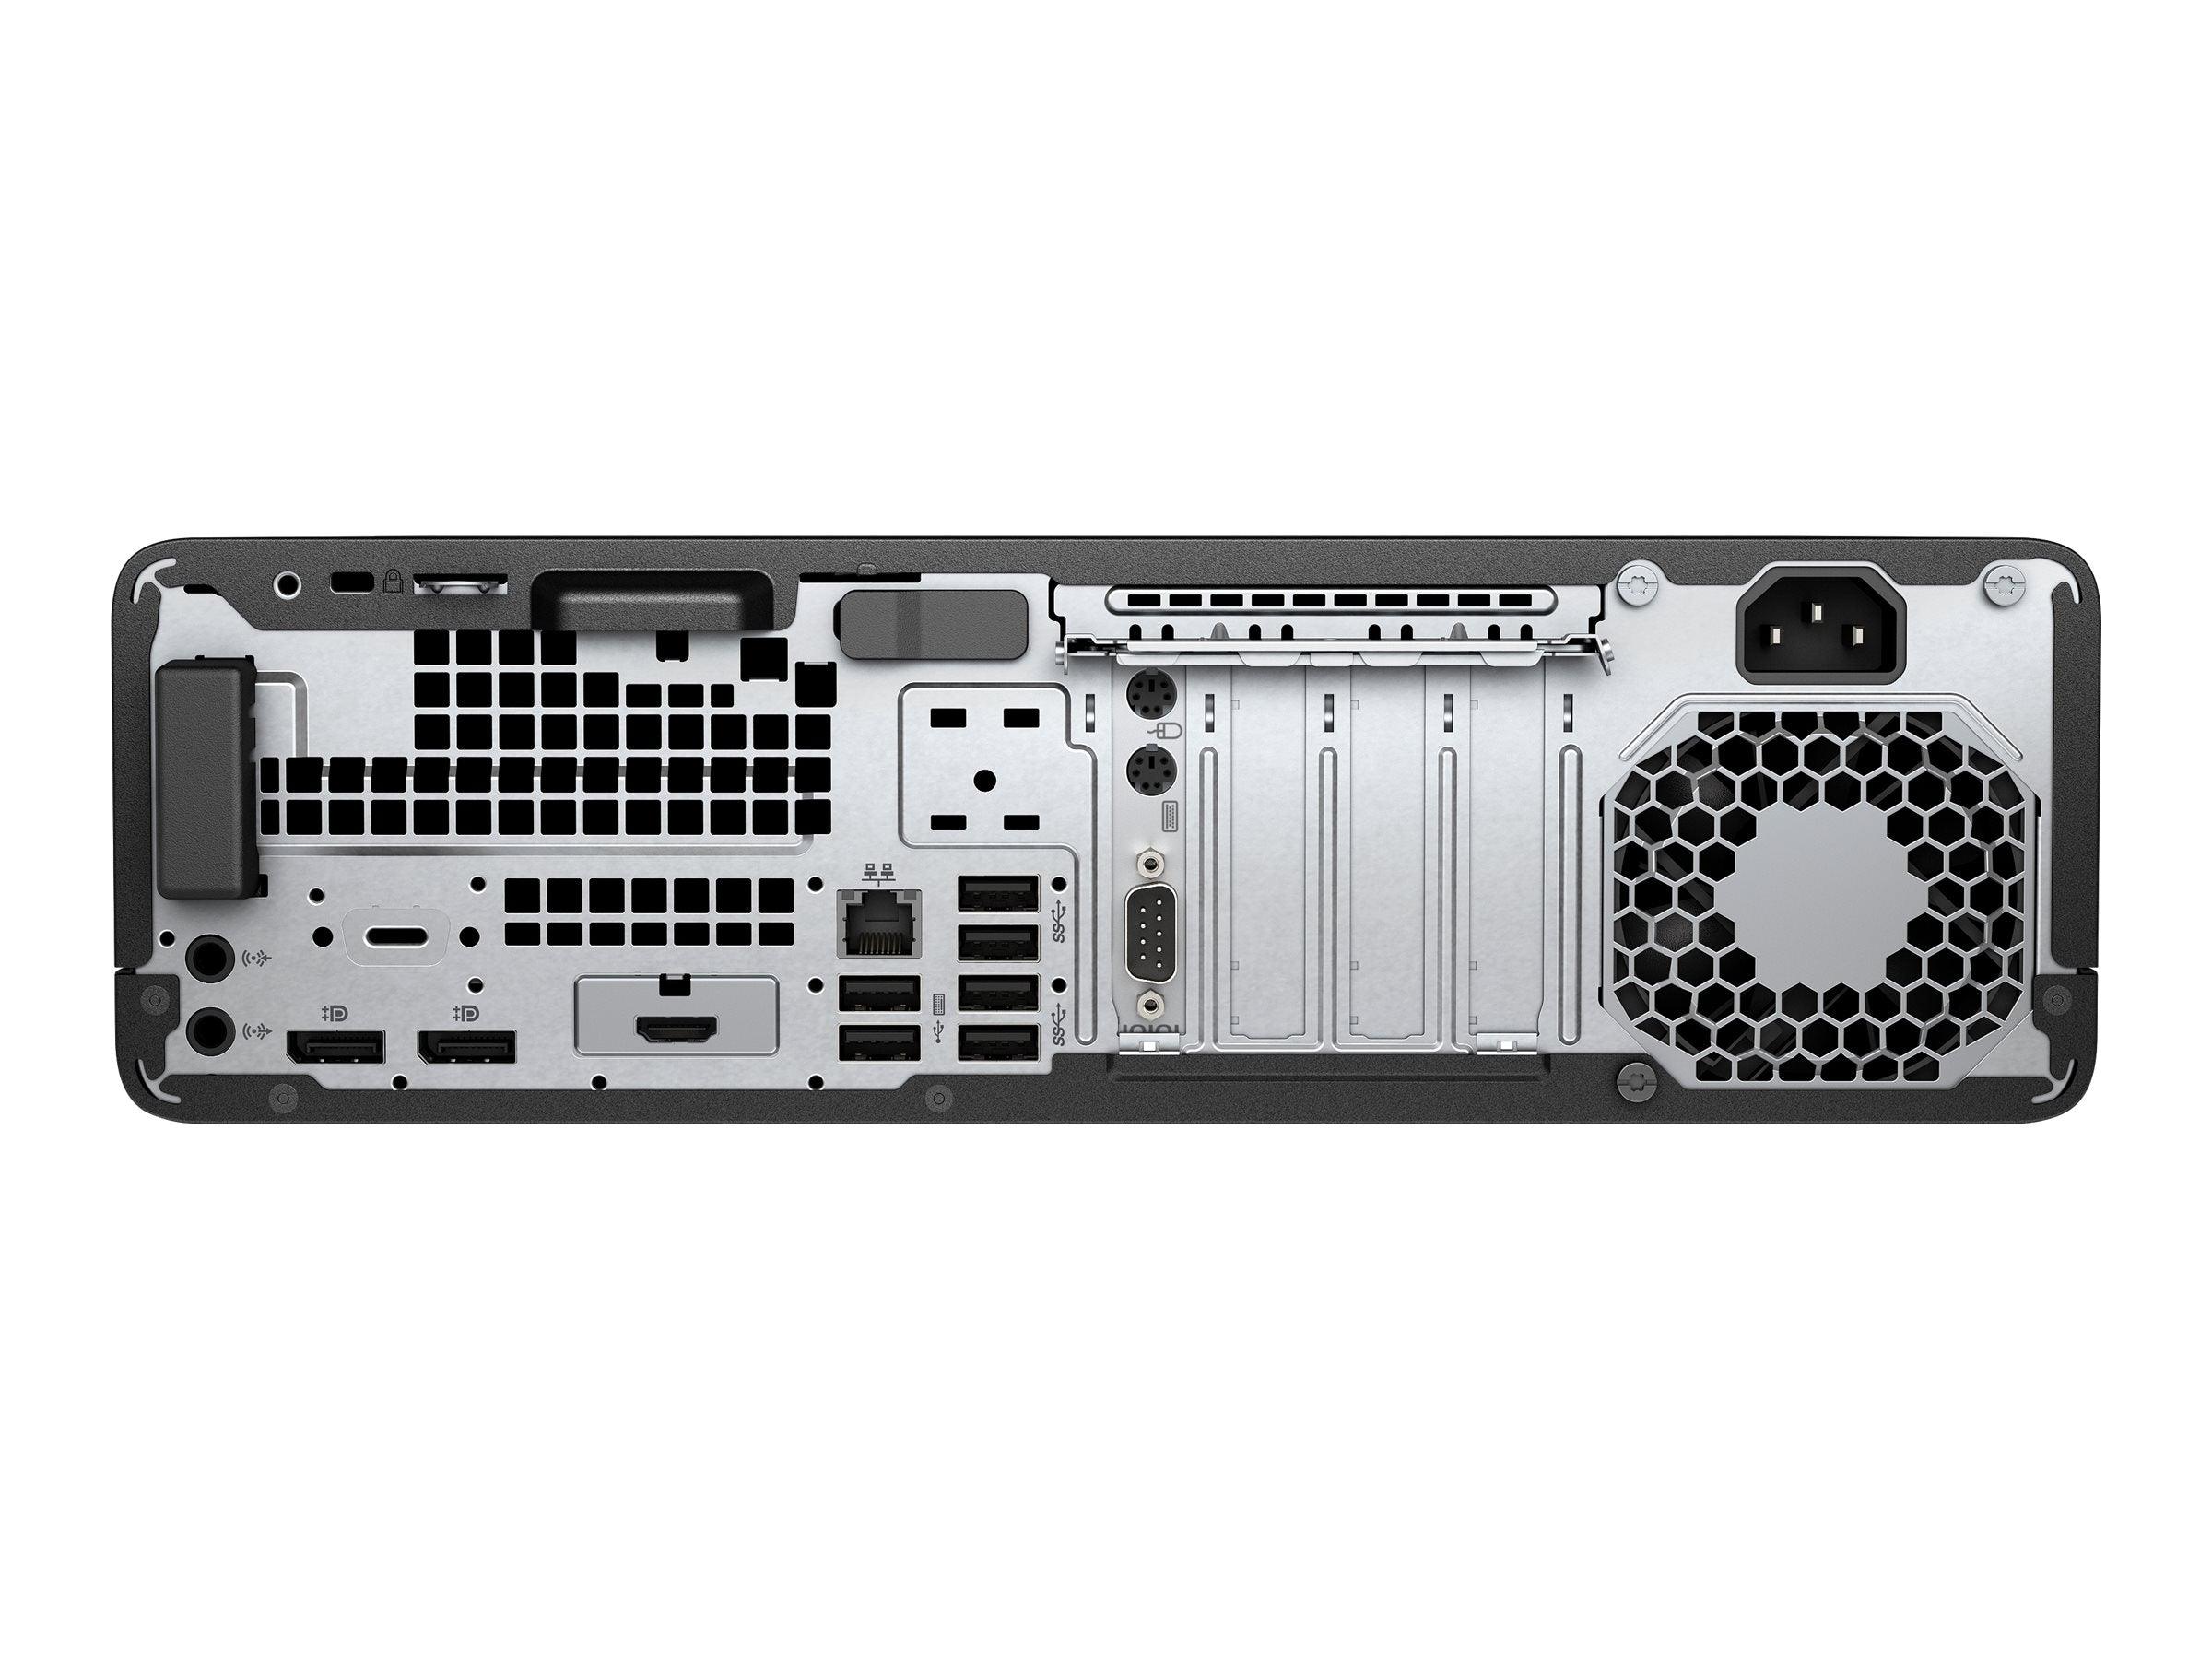 (NEW VENDOR) HP 6N0X7PA#AB5 Elite Desk SFF 800 G9, Q670 Chipset, i5-12500, 8GB DDR5-4800, 512GB M.2 PCIe NVMe SSD, ODD, 11*USB Ports, 2*DP+1*HDMI, 2*Serial, Eng USB KB/Mouse, Int-Speaker, W11P DG, 3 Years On-site Wty - C2 Computer